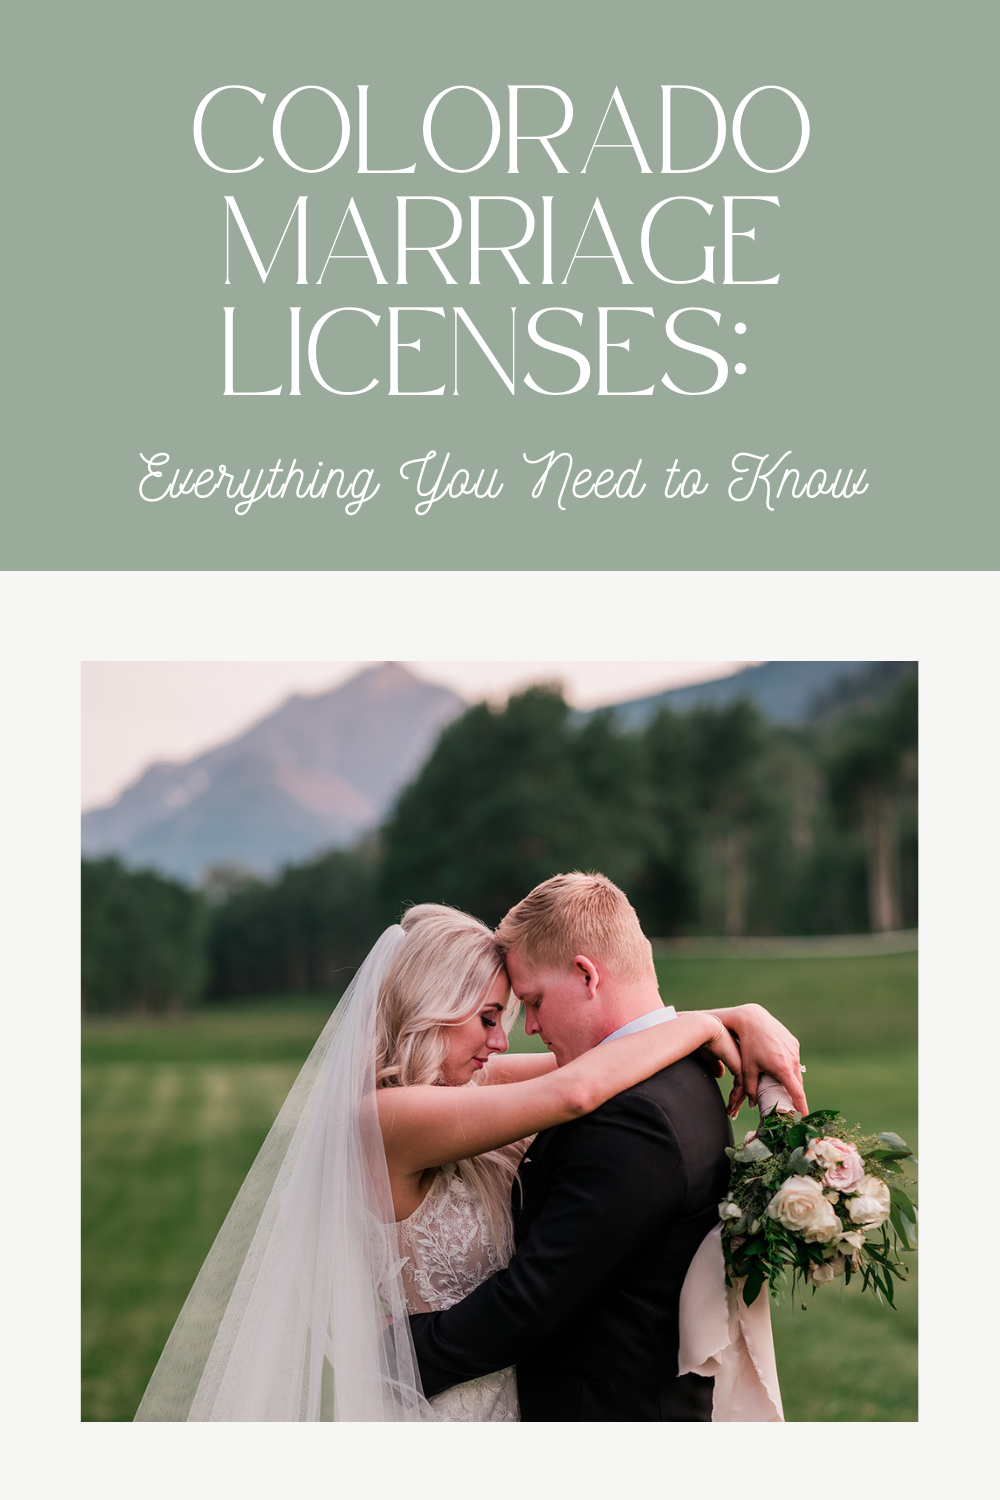 Colorado Marriage Licenses: Everything You Need to Know